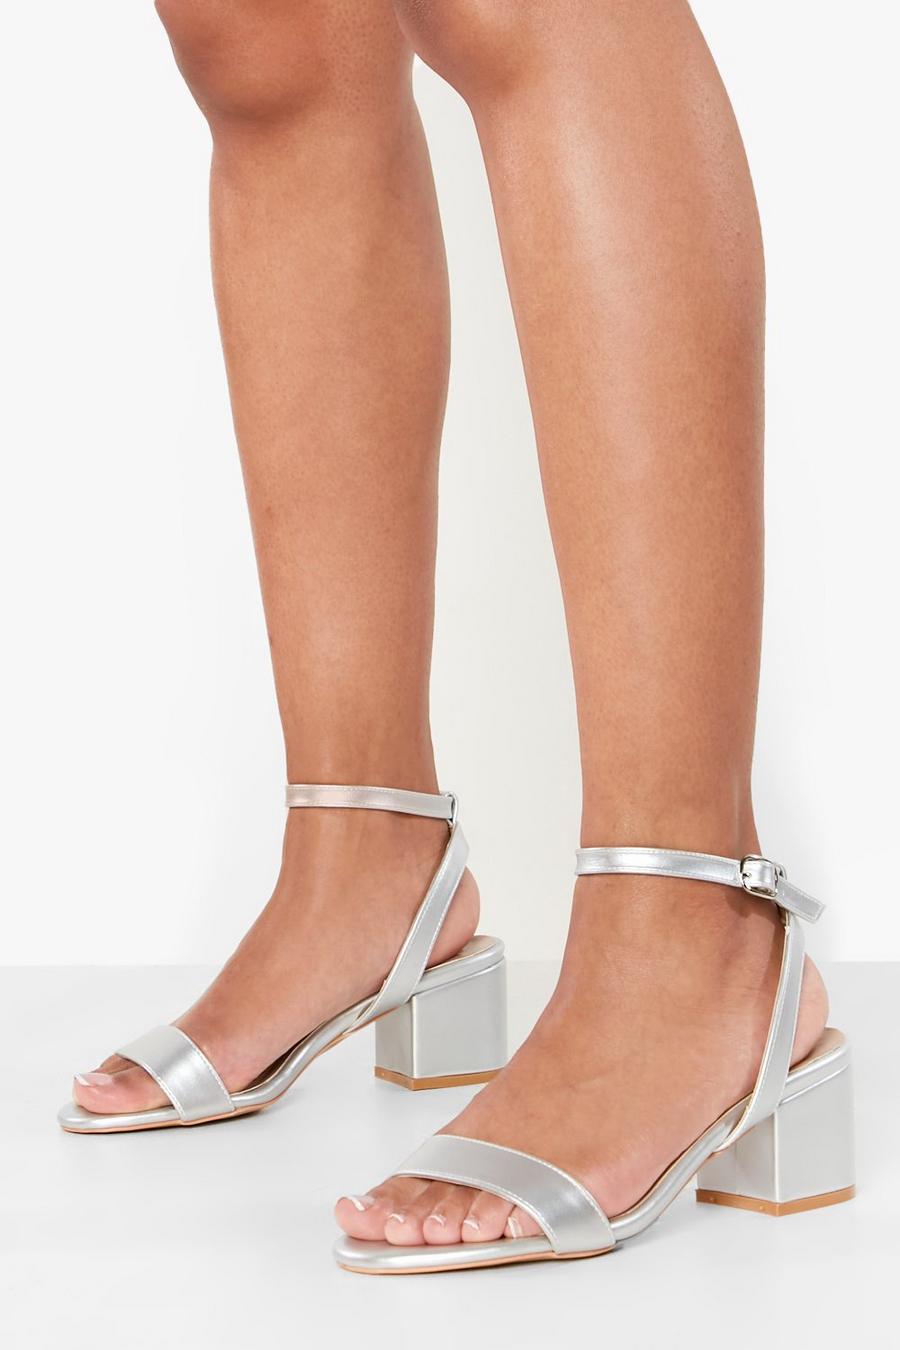 Silver argent Metallic Low Block Barely There Heels